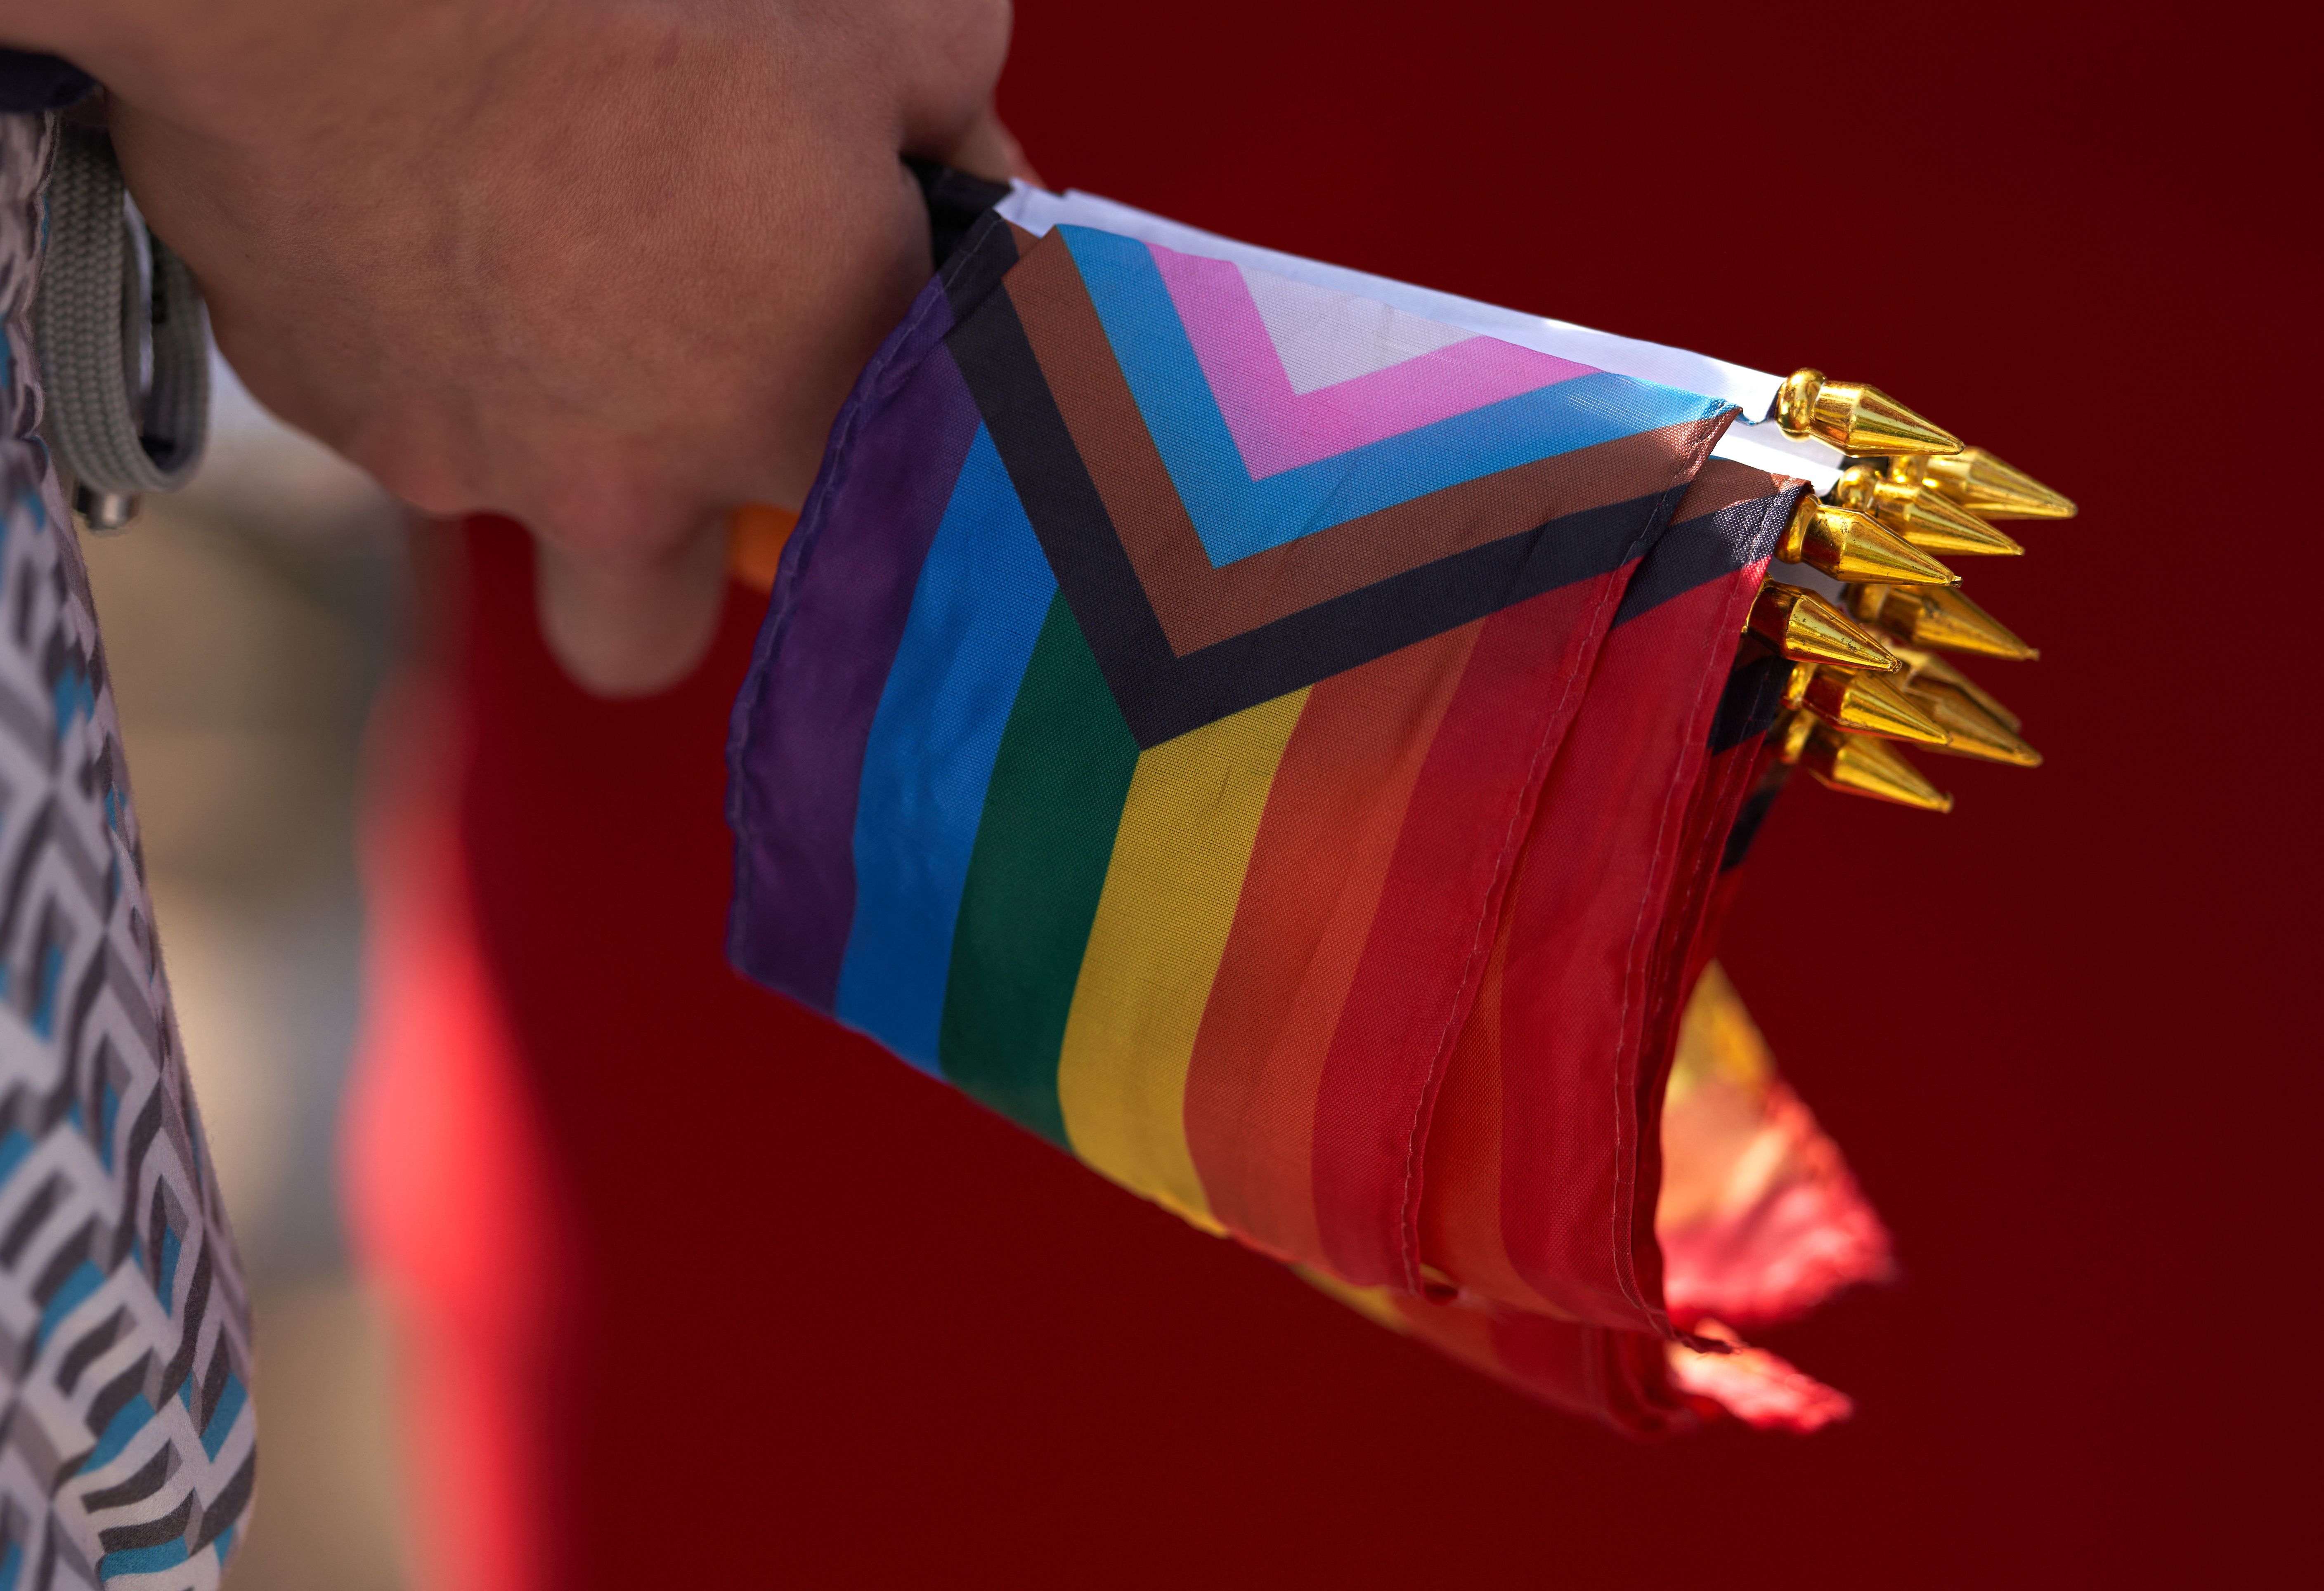 Does Target Believe in LGBTQ Rights or Not? - Bloomberg